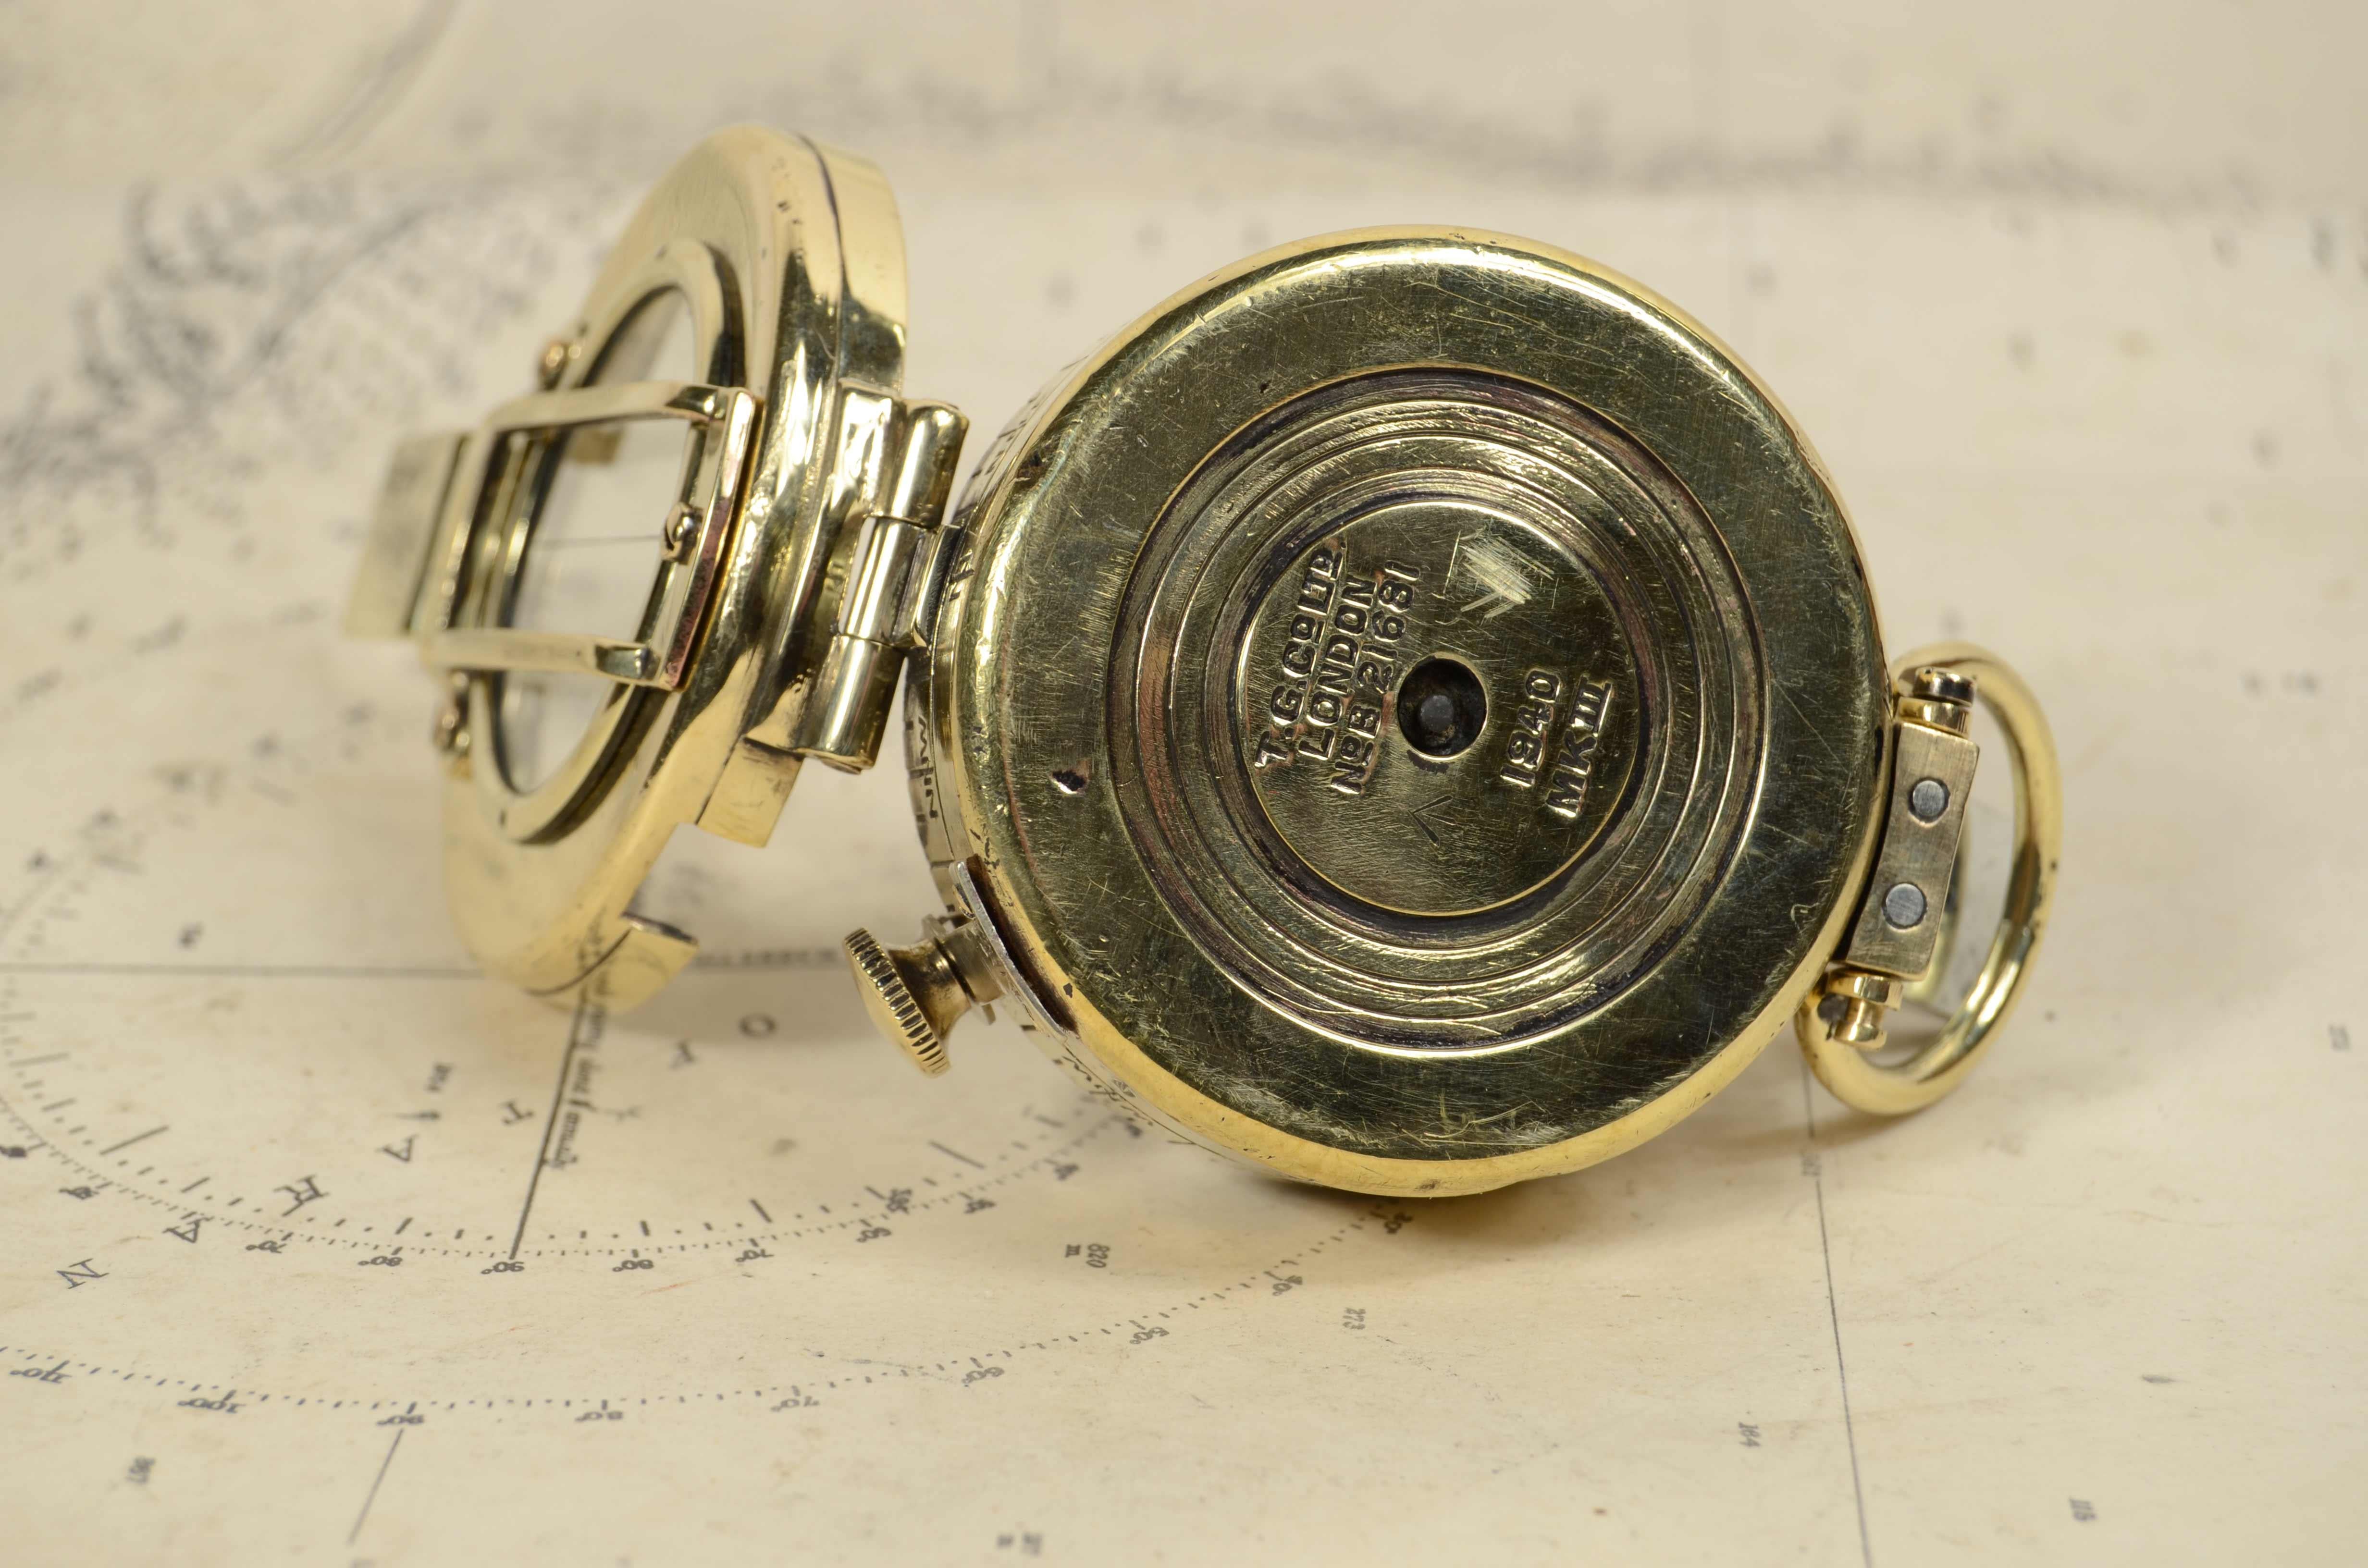 Prismatic compass  by detection signed T.G. Co Ltd London no. B 21681 1940 MK For Sale 1